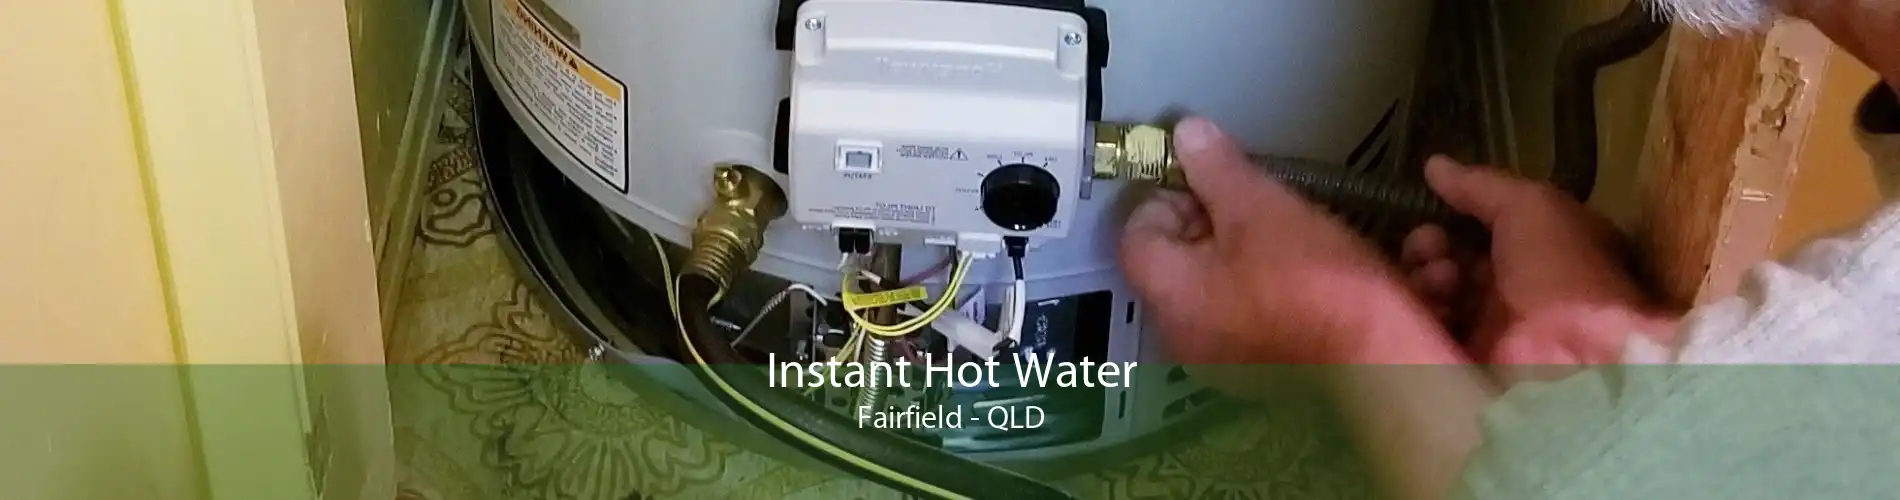 Instant Hot Water Fairfield - QLD